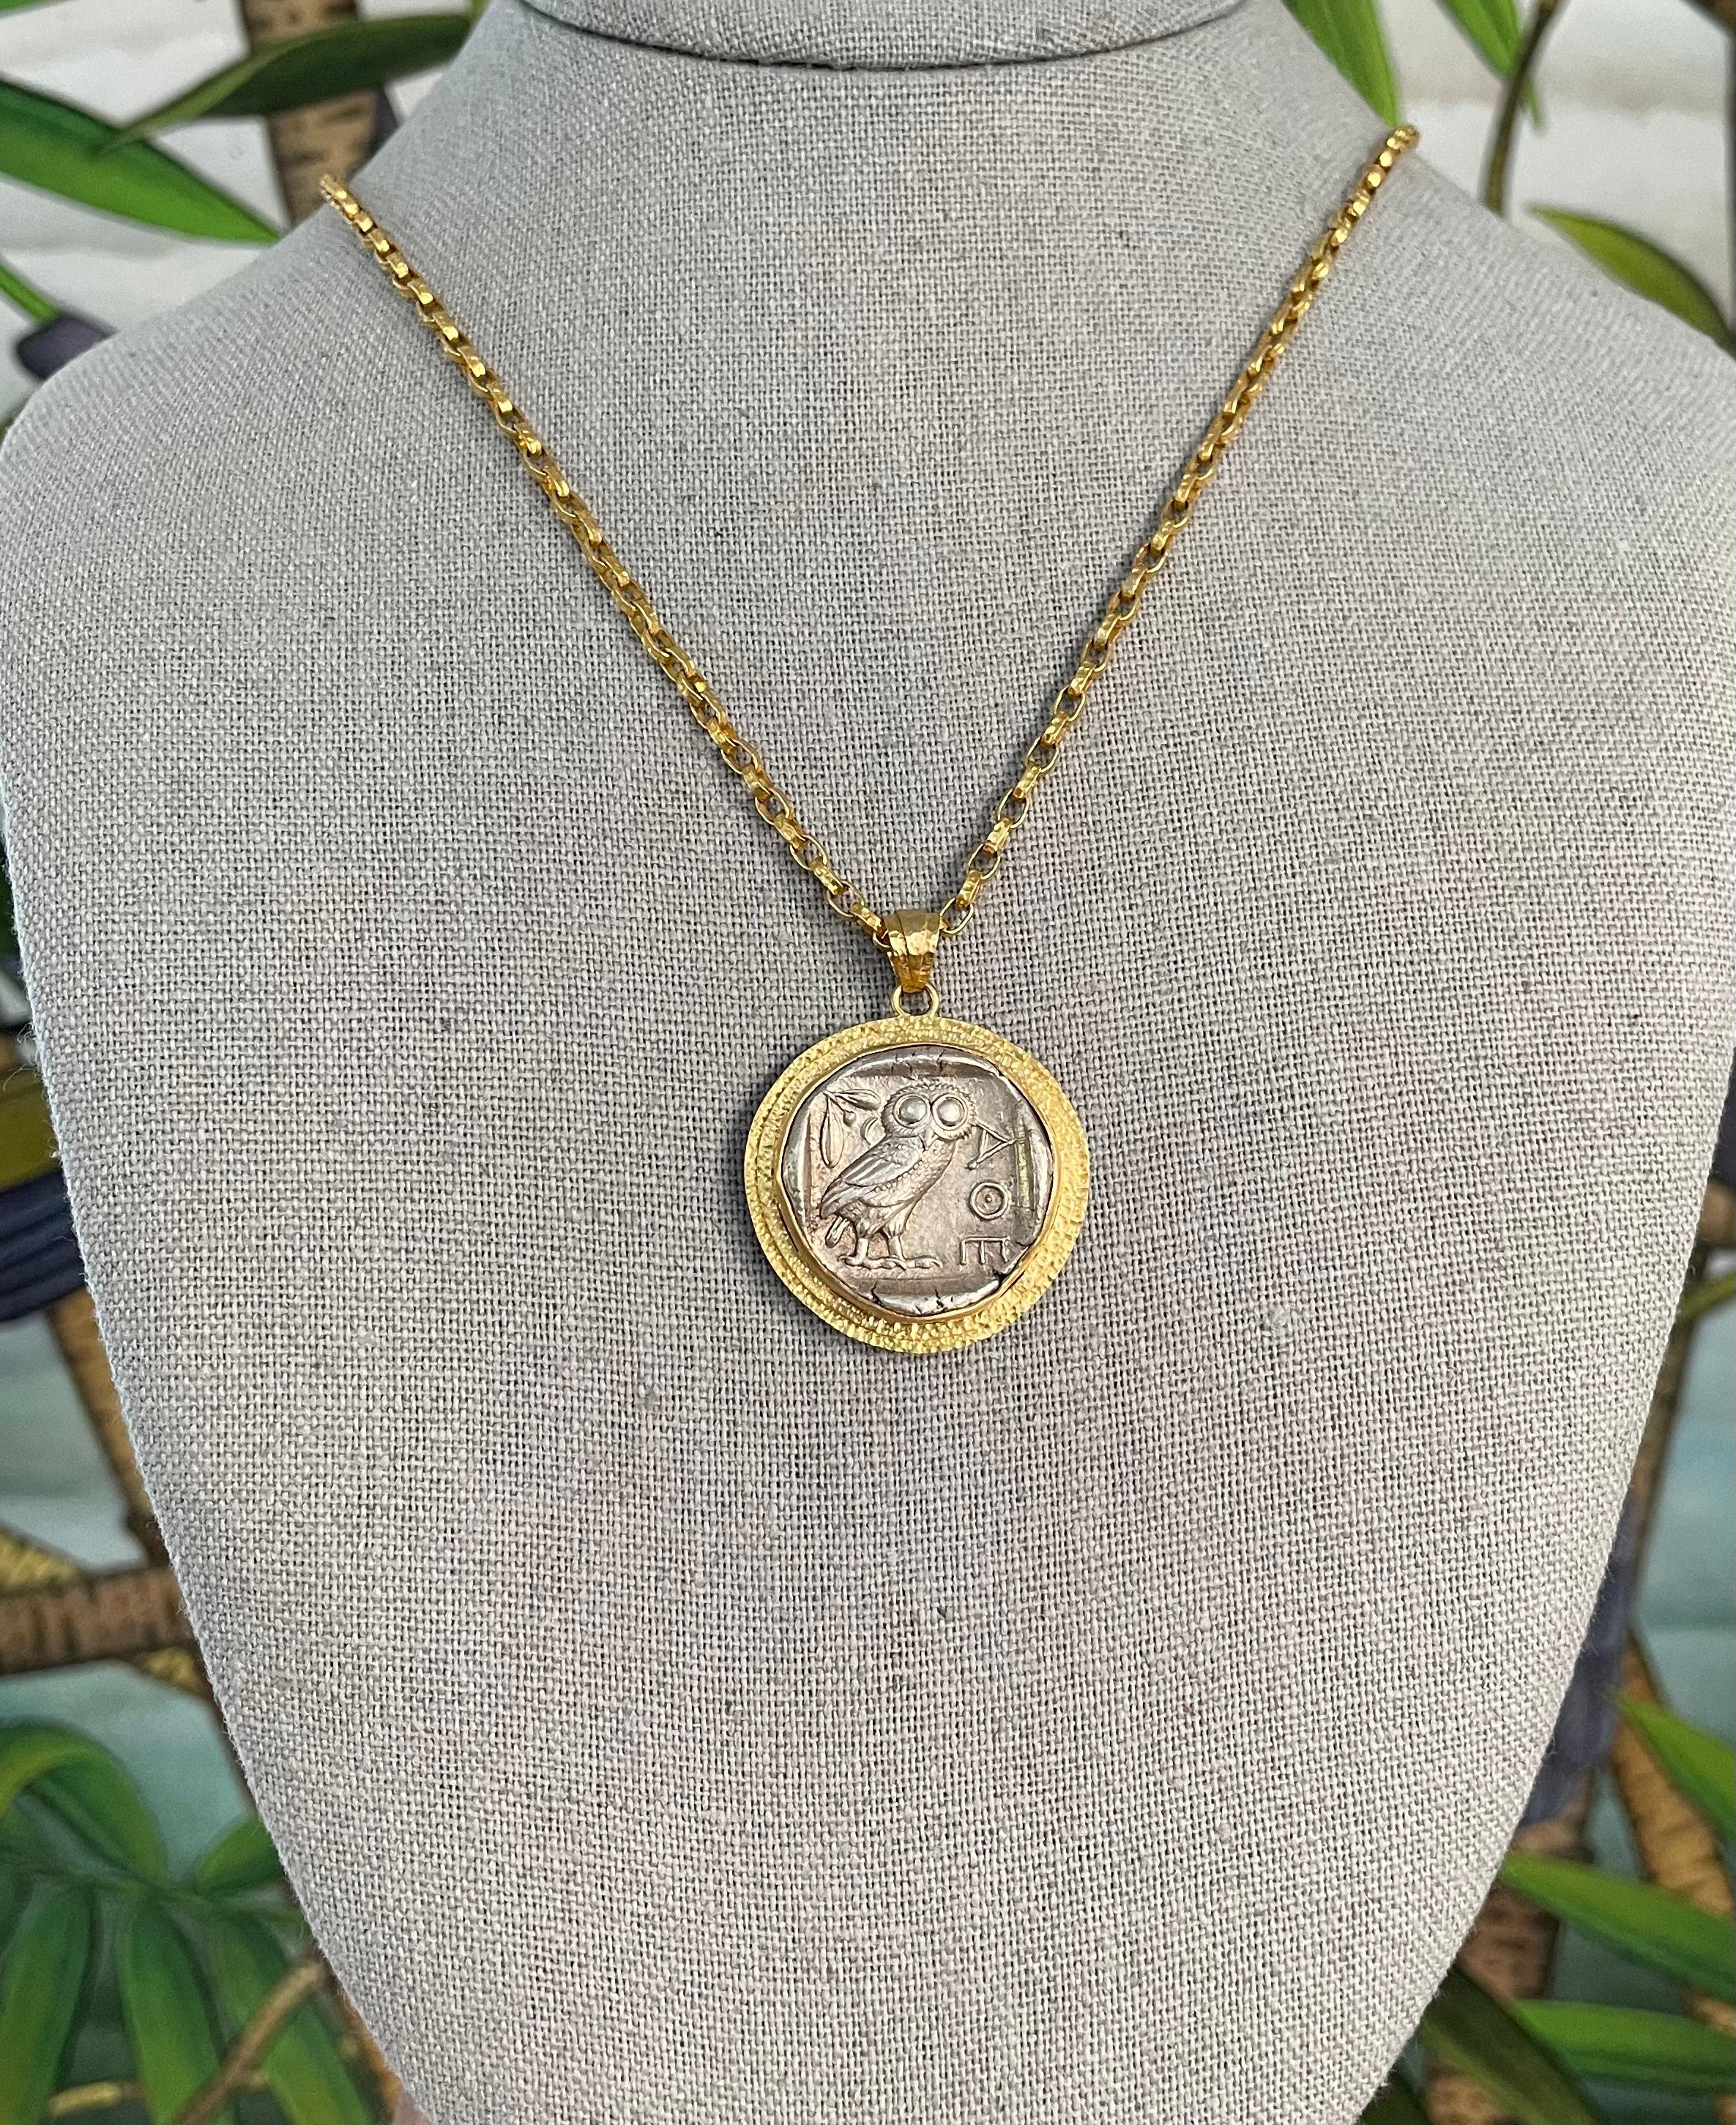 An authentic silver Ancient Greek Athenian owl coin from 475-425 BC is held in a hand textured double hammered bezel signature Steven Battelle 18K gold pendant design. This TOP-GRADE iconic coin from Athens, Attica, is a tetradrachm (4 drachms)